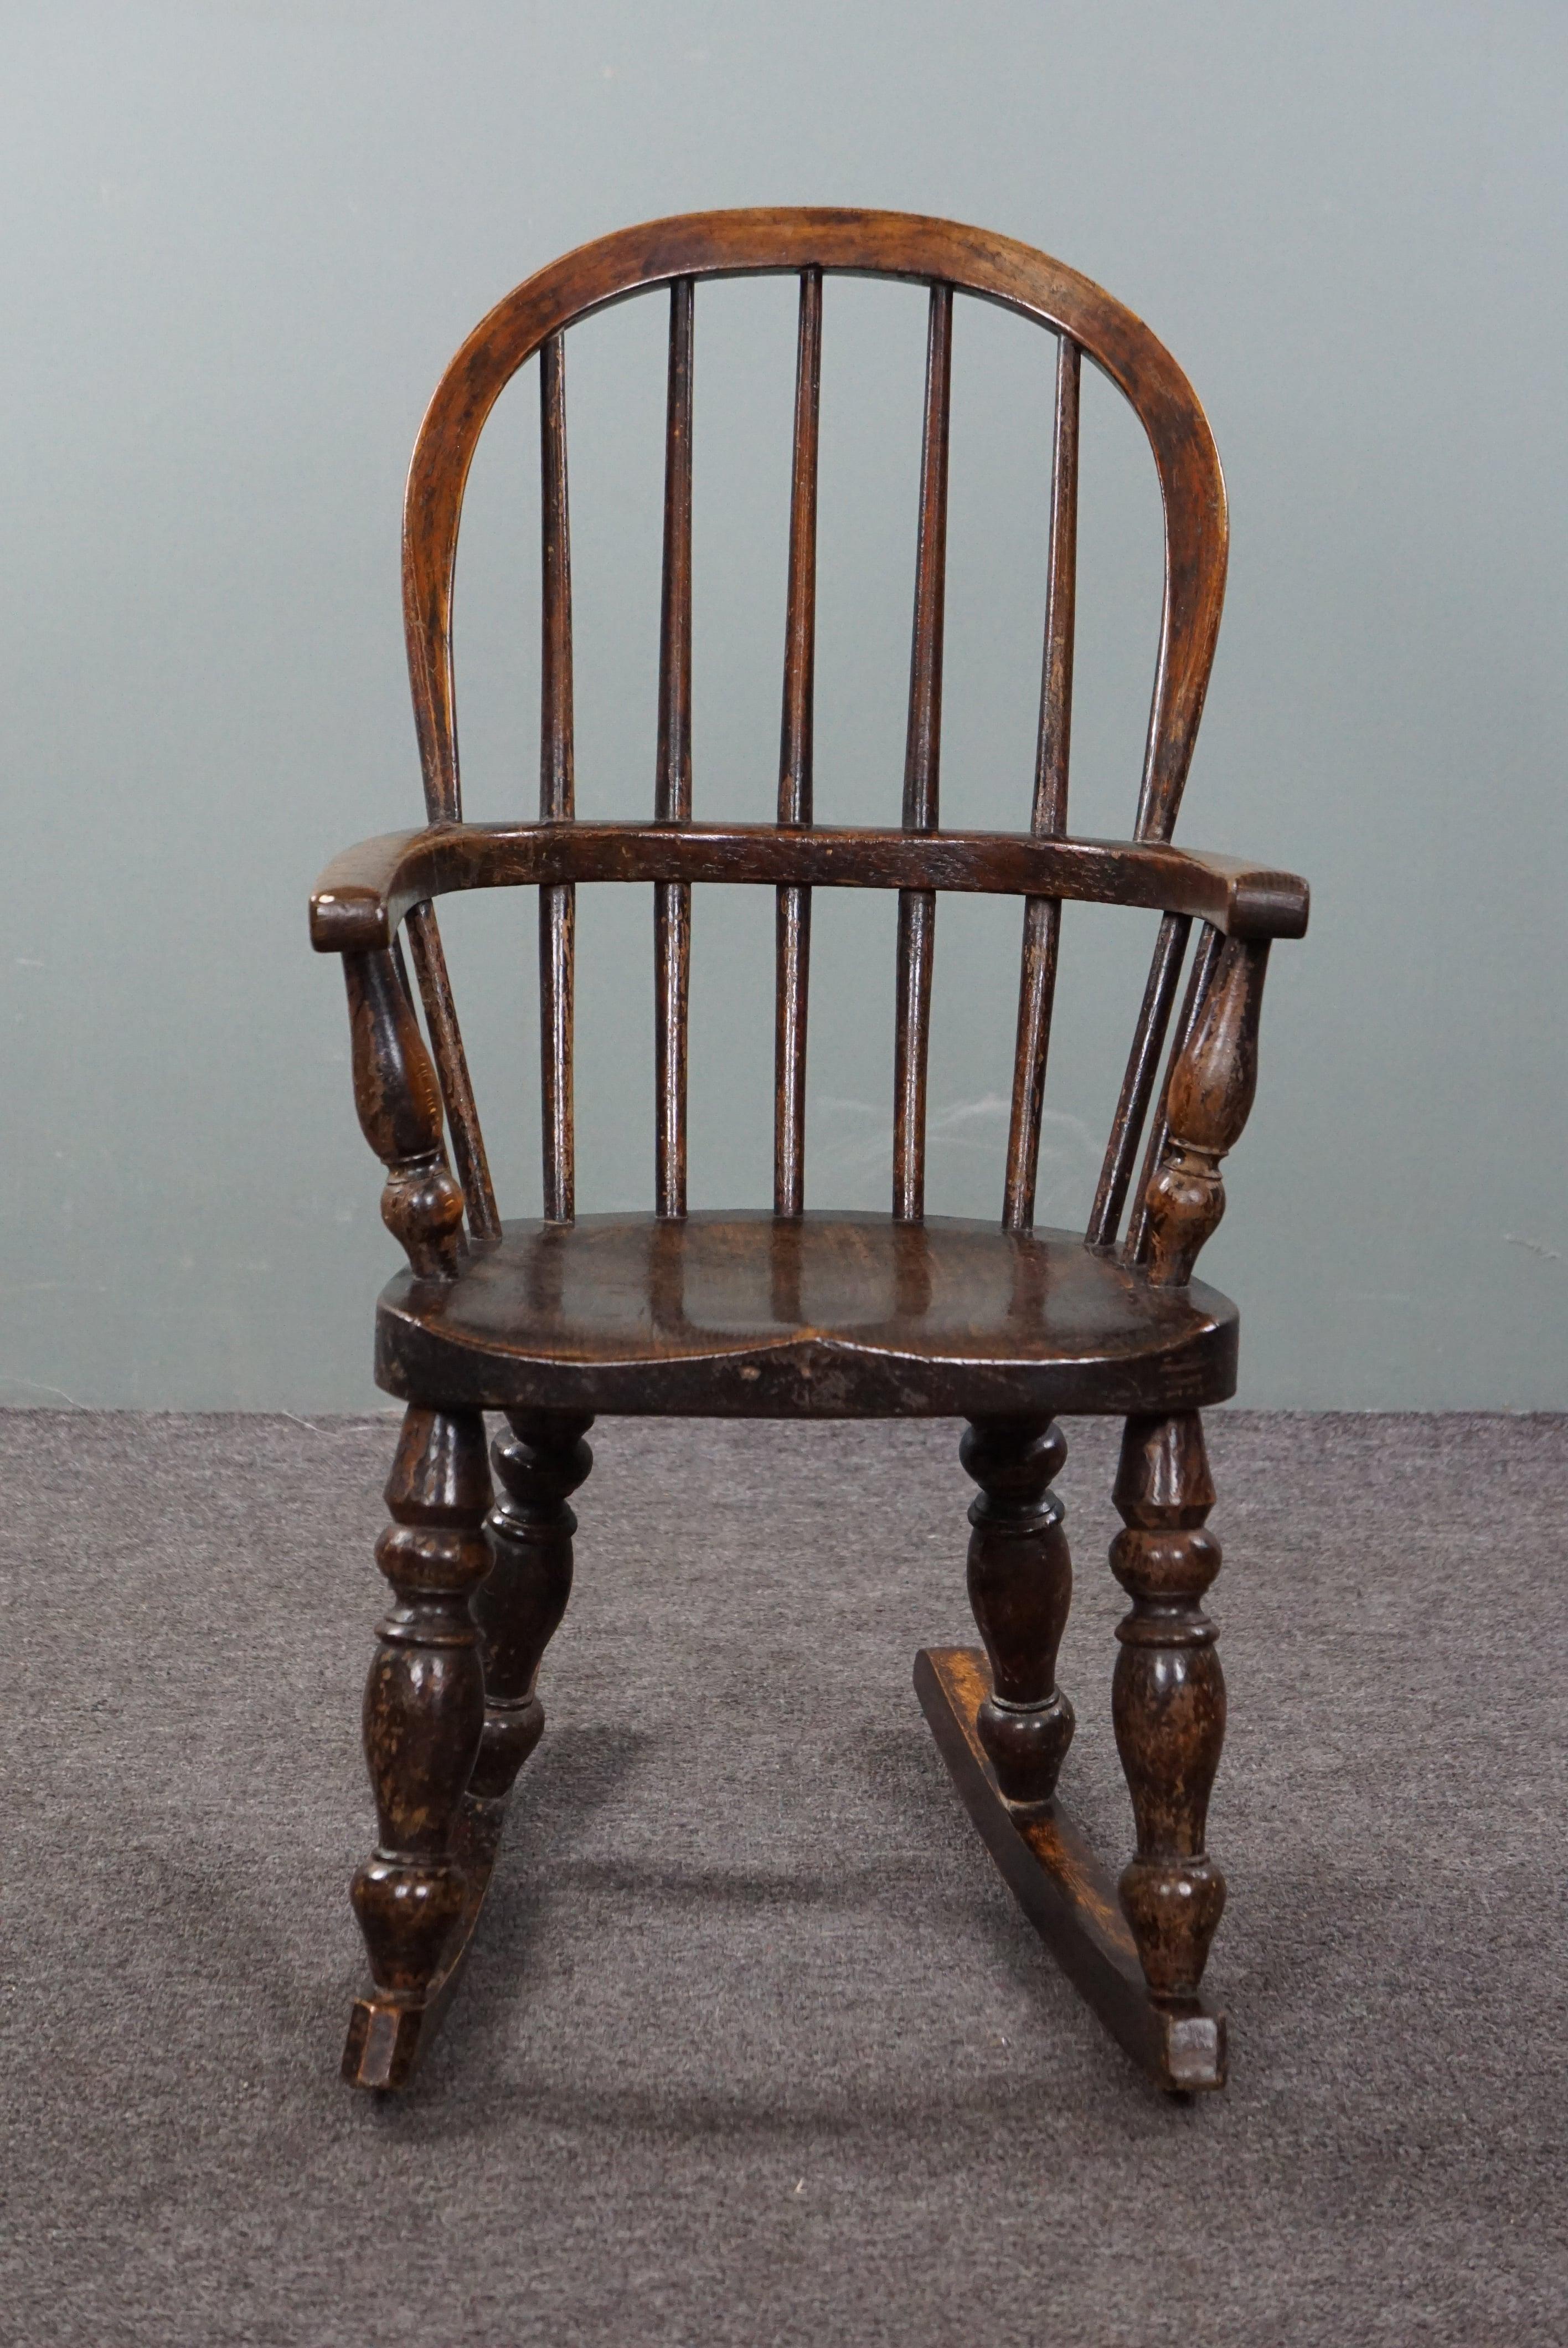 Offered is this antique Windsor rocking chair in a child's size. The charming allure of this chair from the early 19th century reflects a bygone era and brings a touch of history into the (children's) room. The unique design and beautiful details